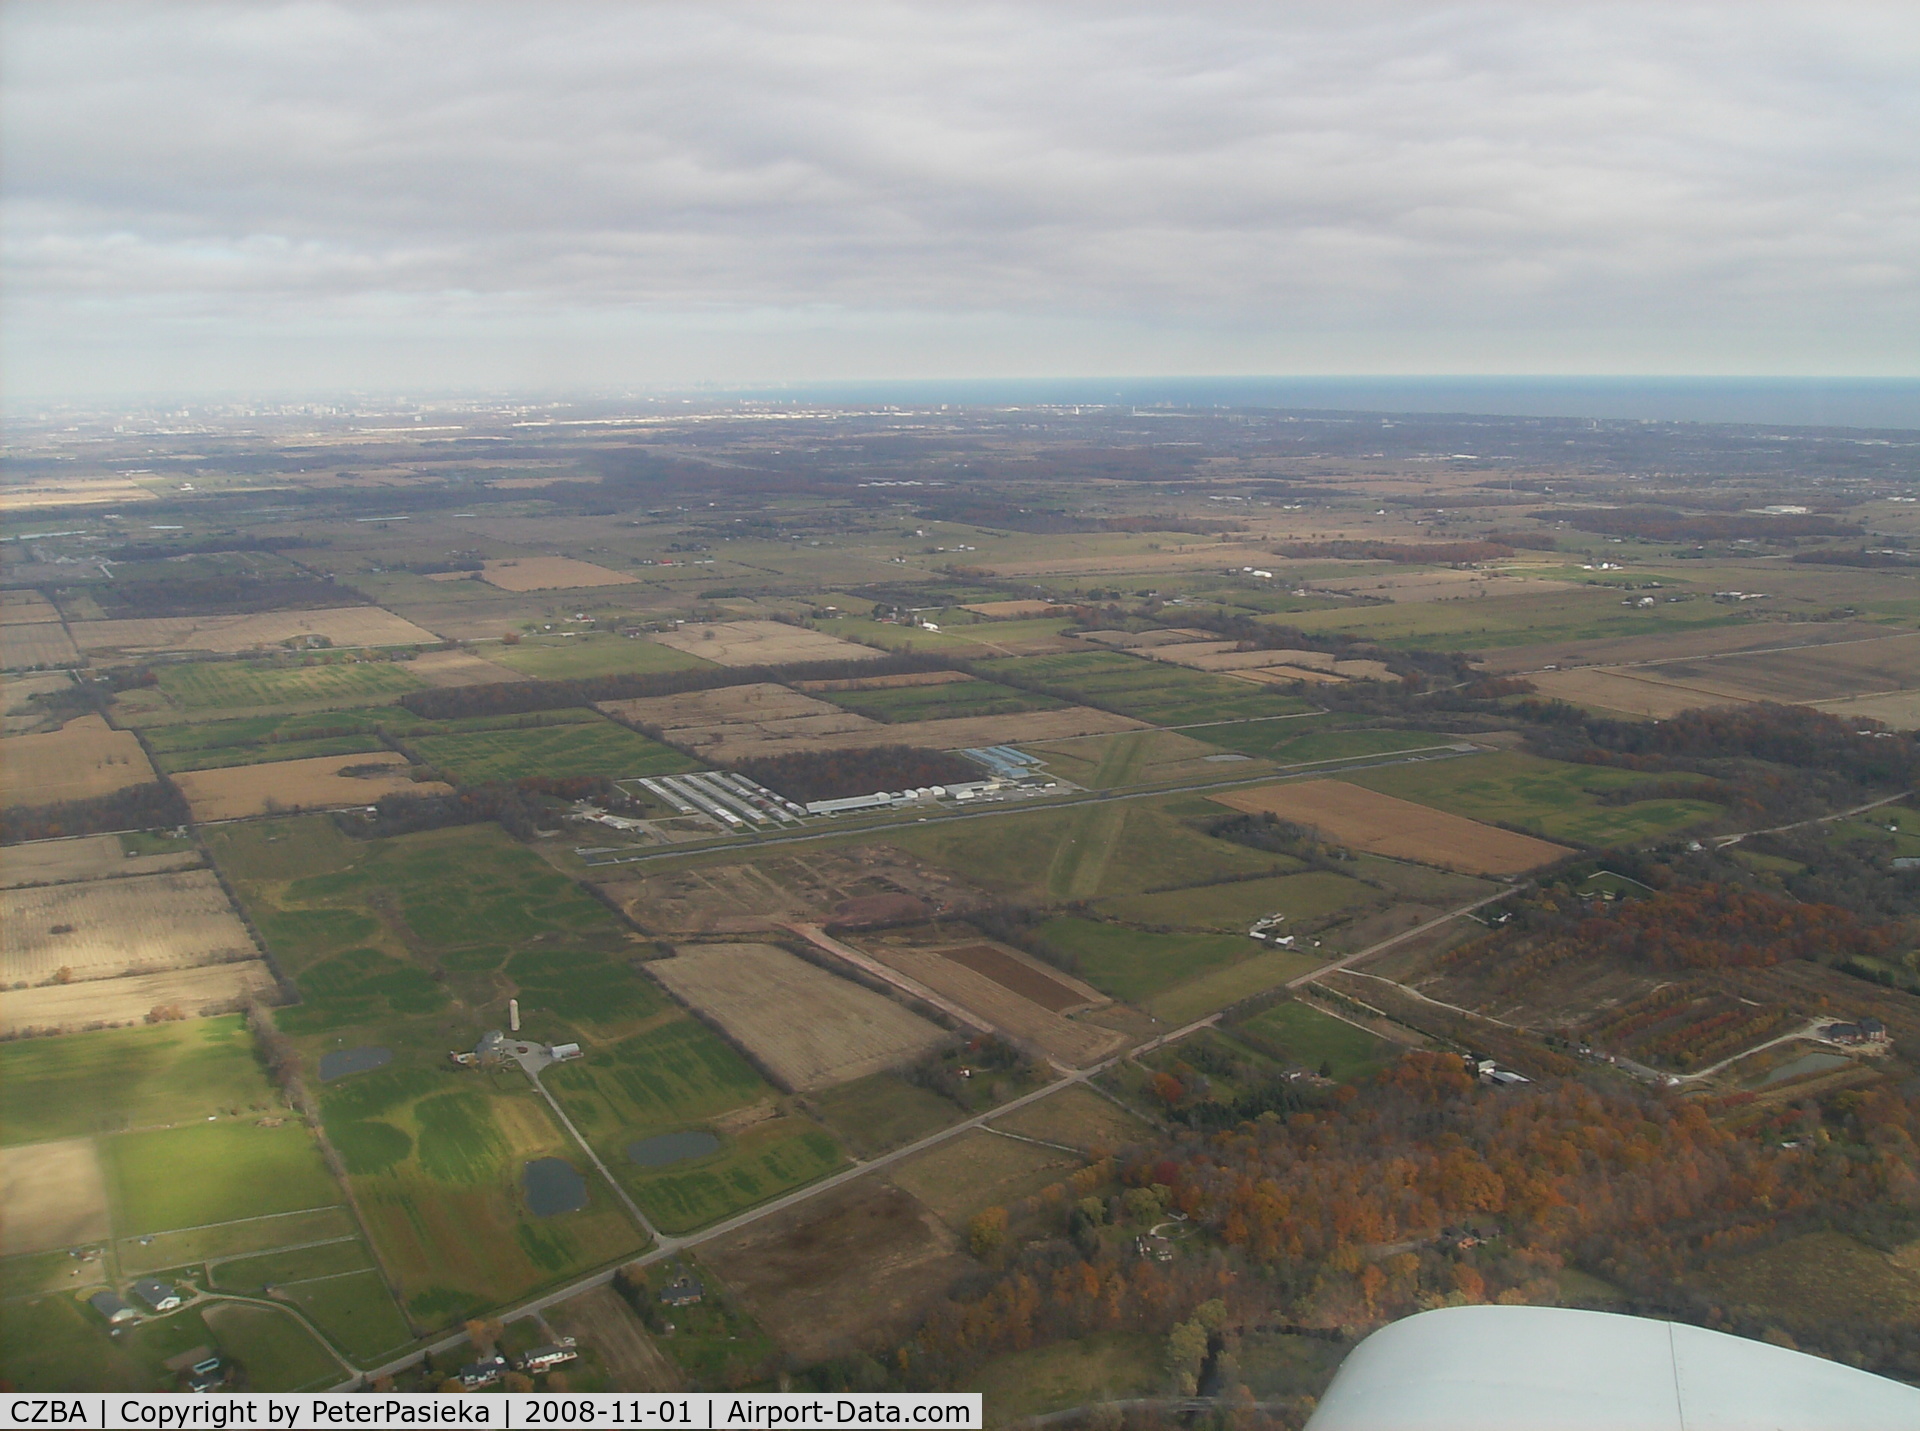 Burlington Airpark Airport, Burlington, Ontario Canada (CZBA) - Burlington Airport, Ontario Canada. We're looking east. Note the new construction on the north/west corner of the airport!!!